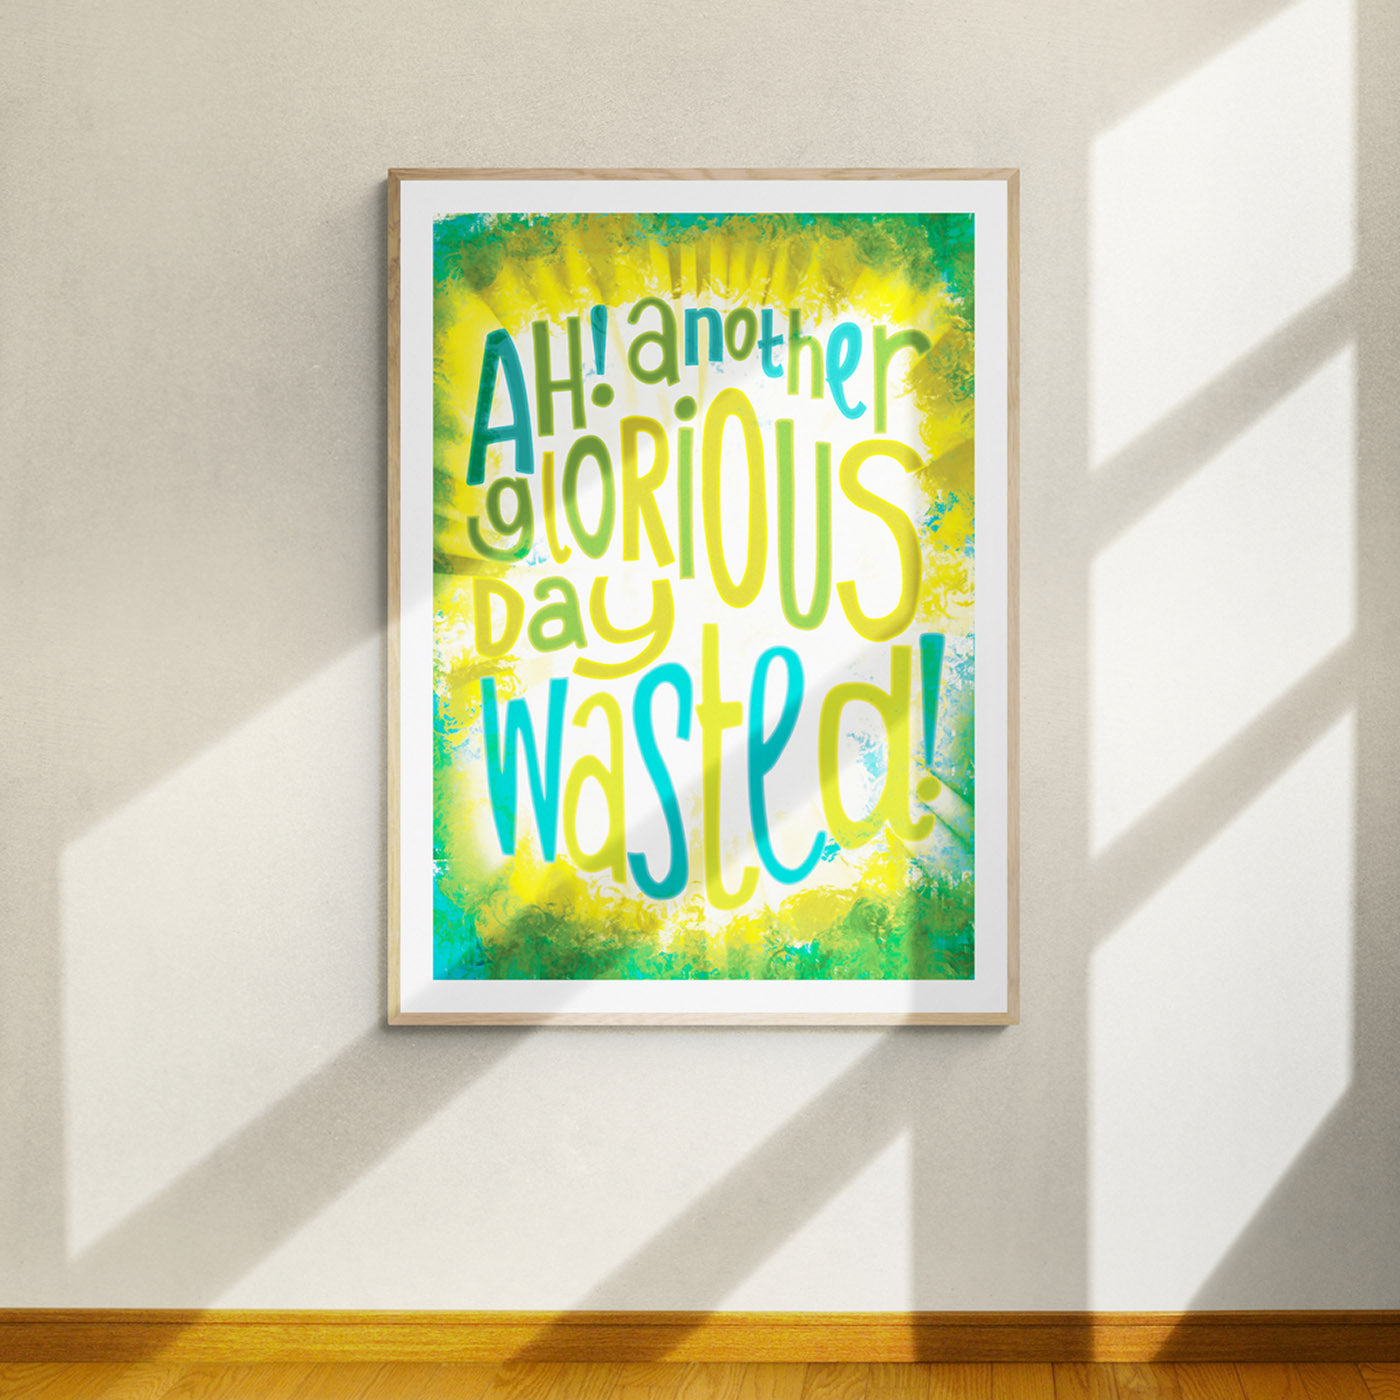 Another Glorious Day Wasted! Art Print